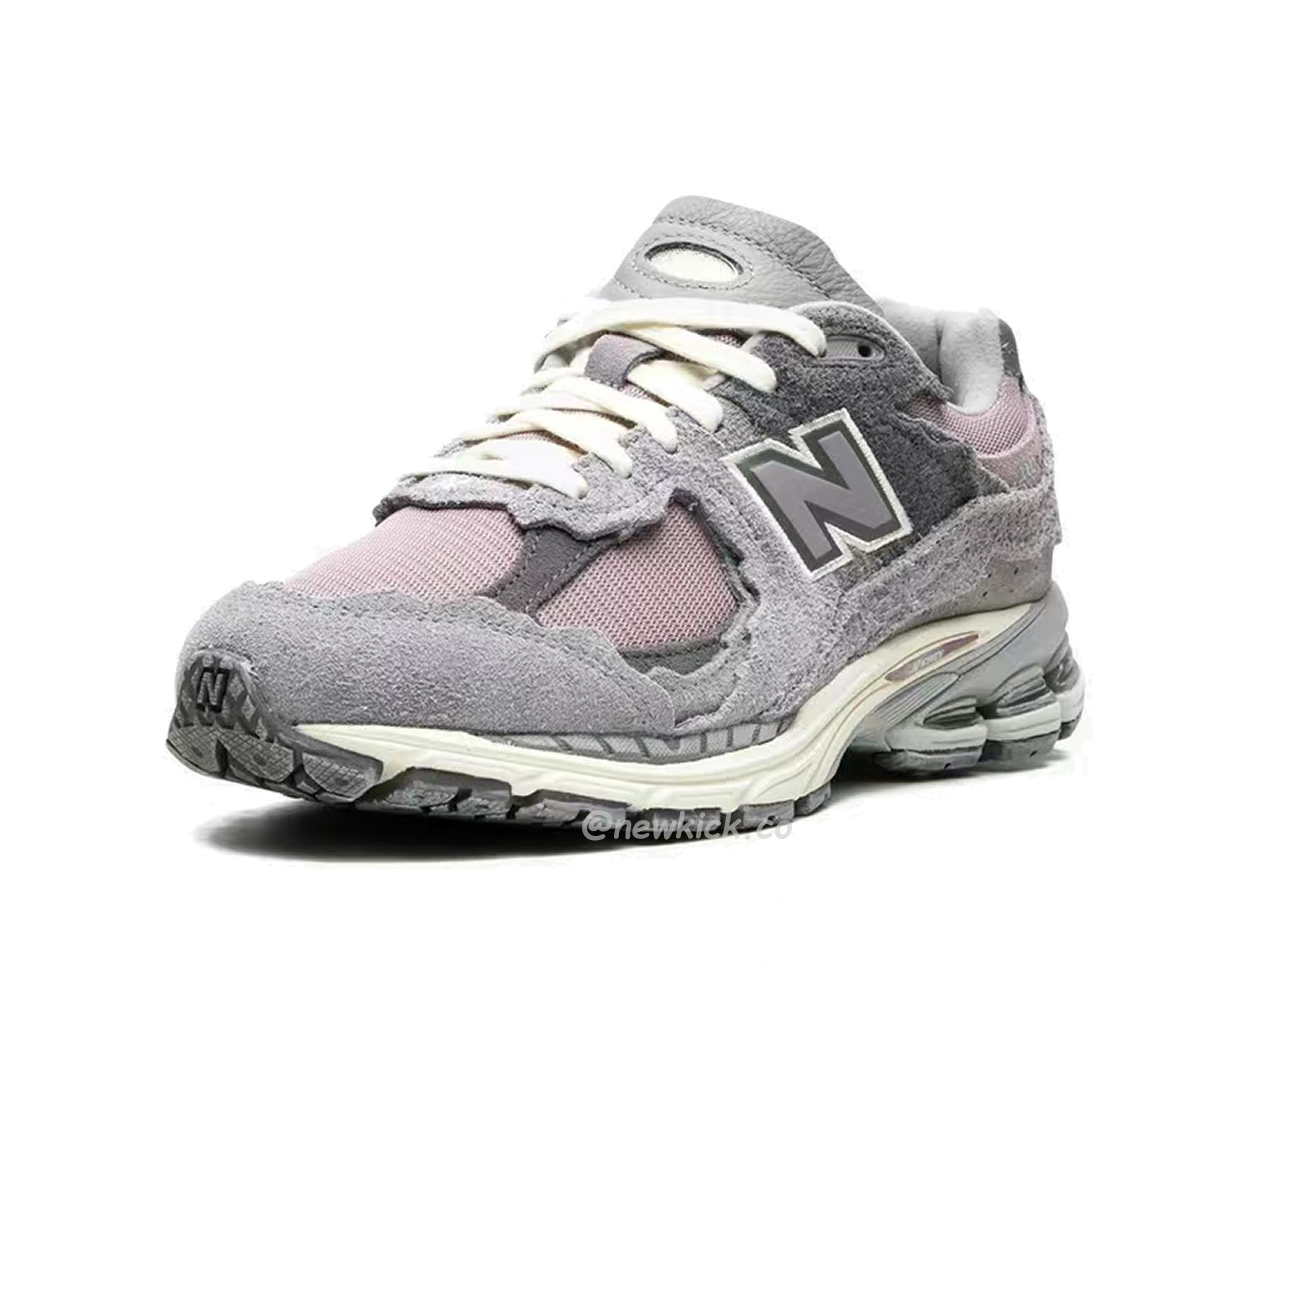 New Balance 2002r Protection Pack Lunar New Year Dusty Lilac M2002rdy (6) - newkick.org